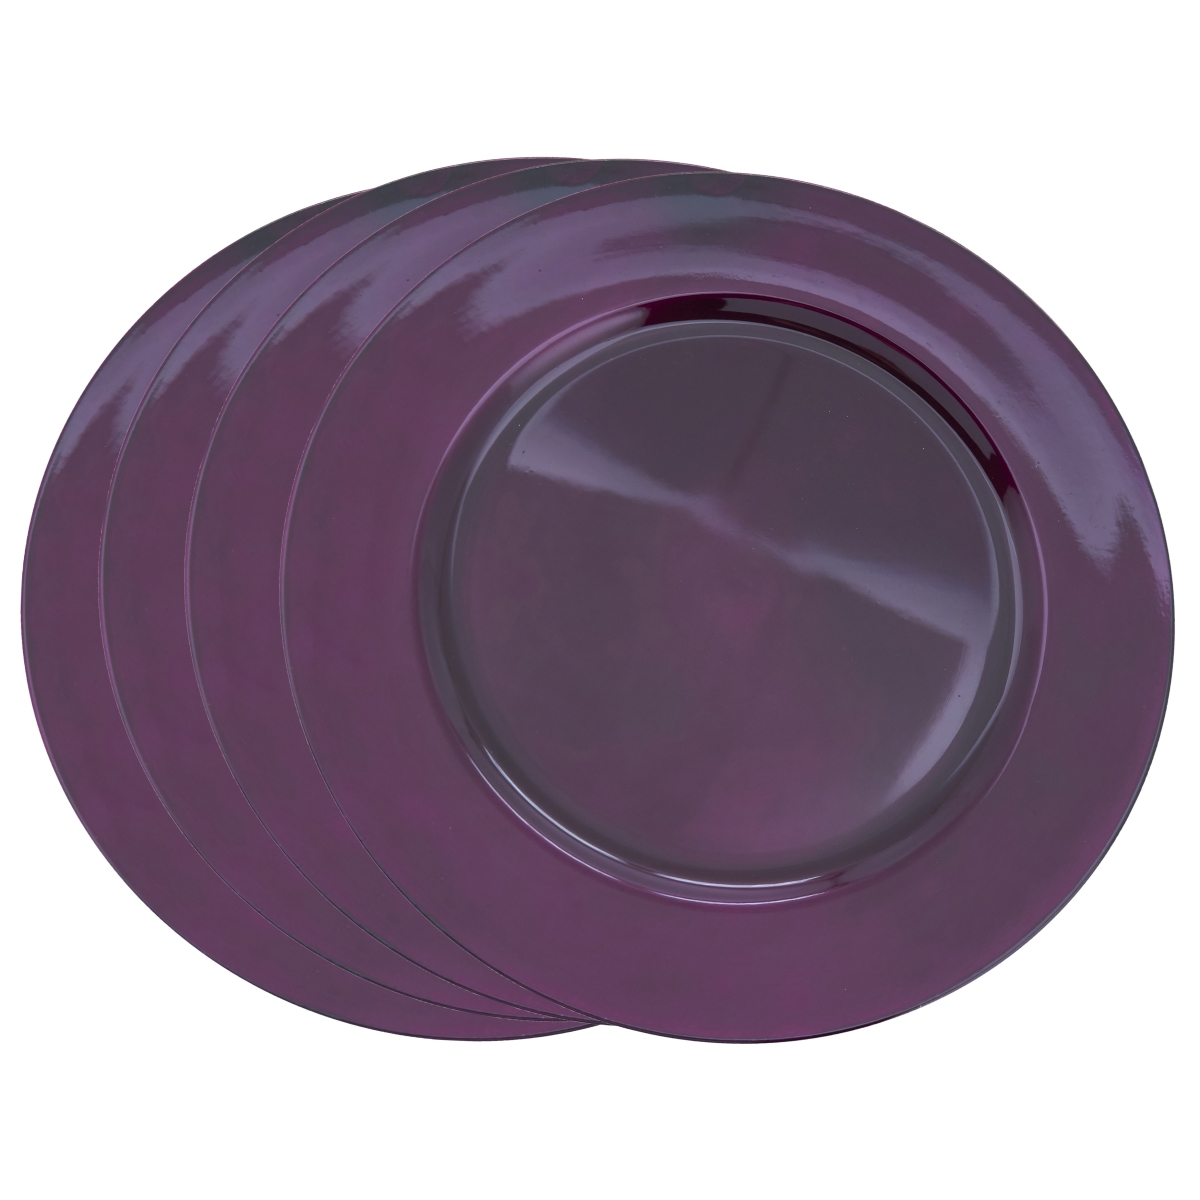 Ch001.eg13r 13 In. Round Classic Design Charger Plate - Eggplant, Set Of 4